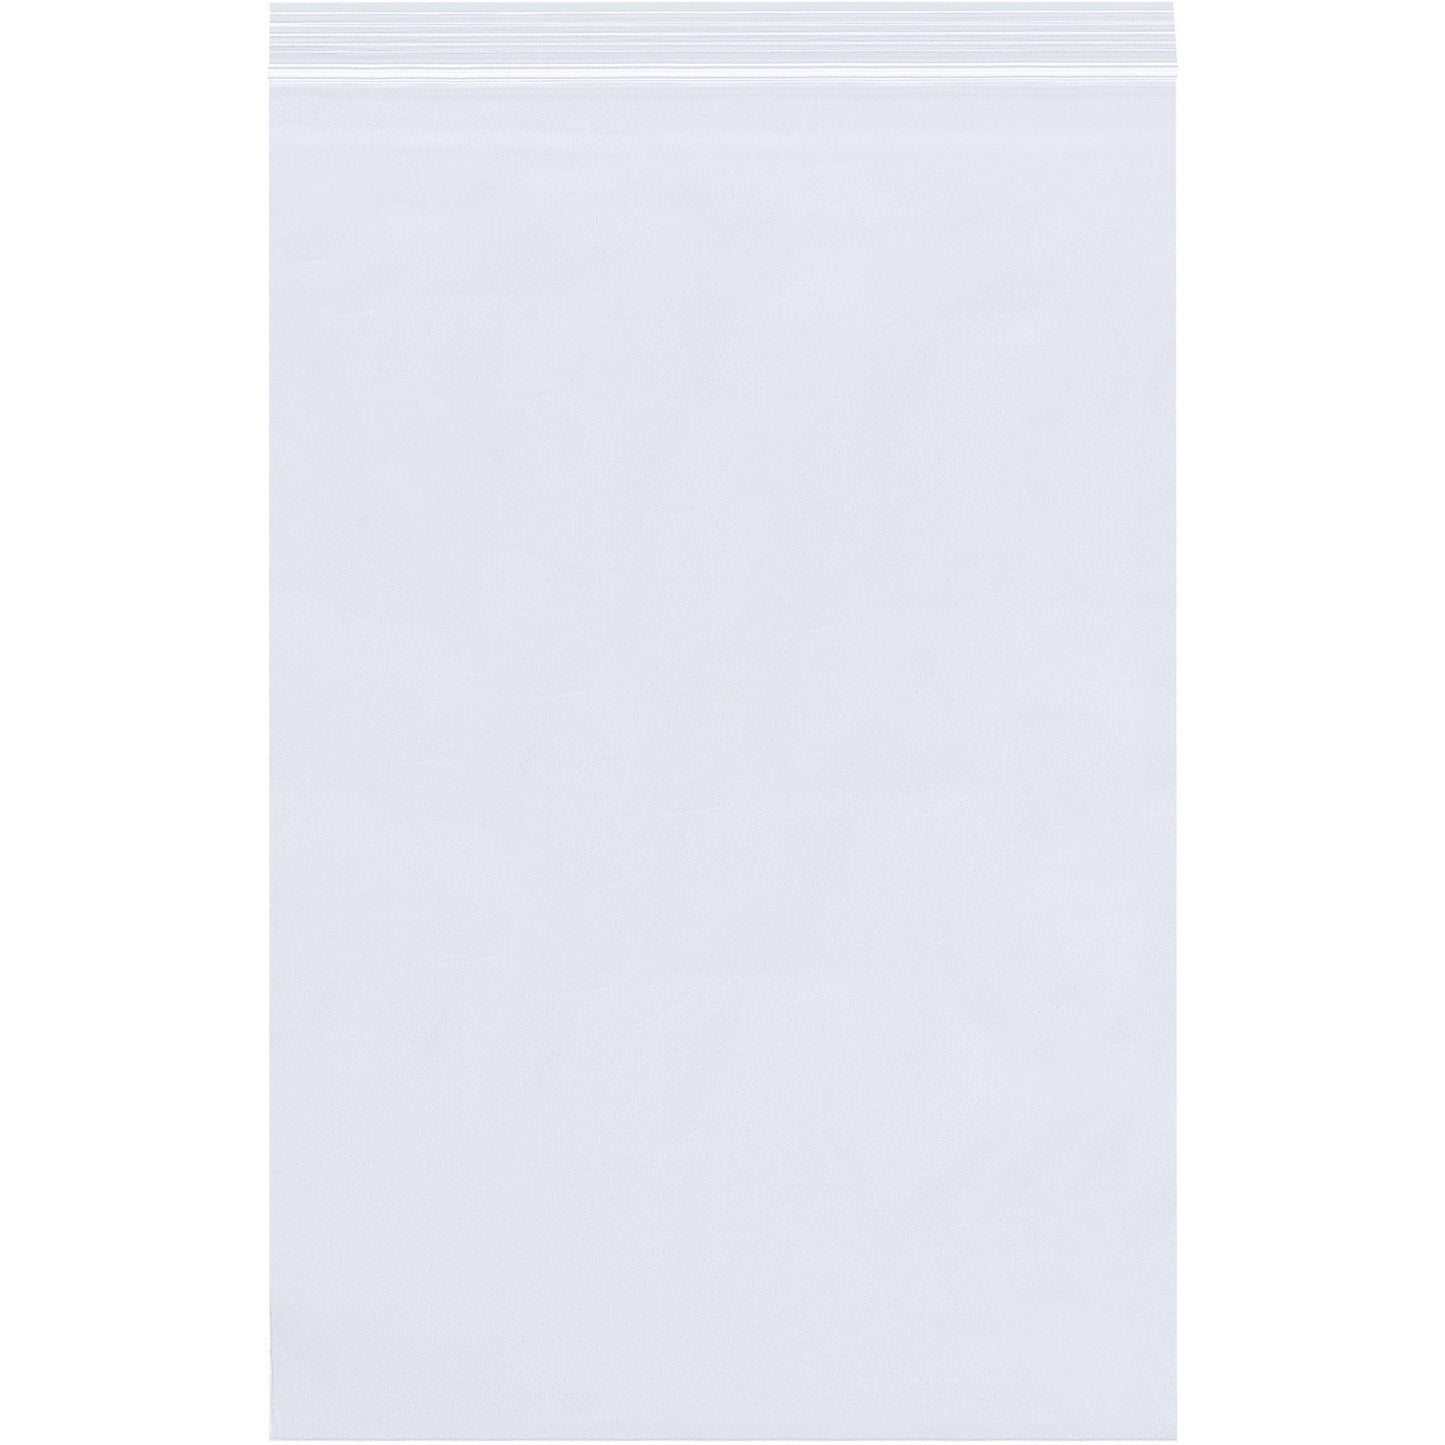 20 x 20" - 6 Mil Reclosable Poly Bags - PB3906